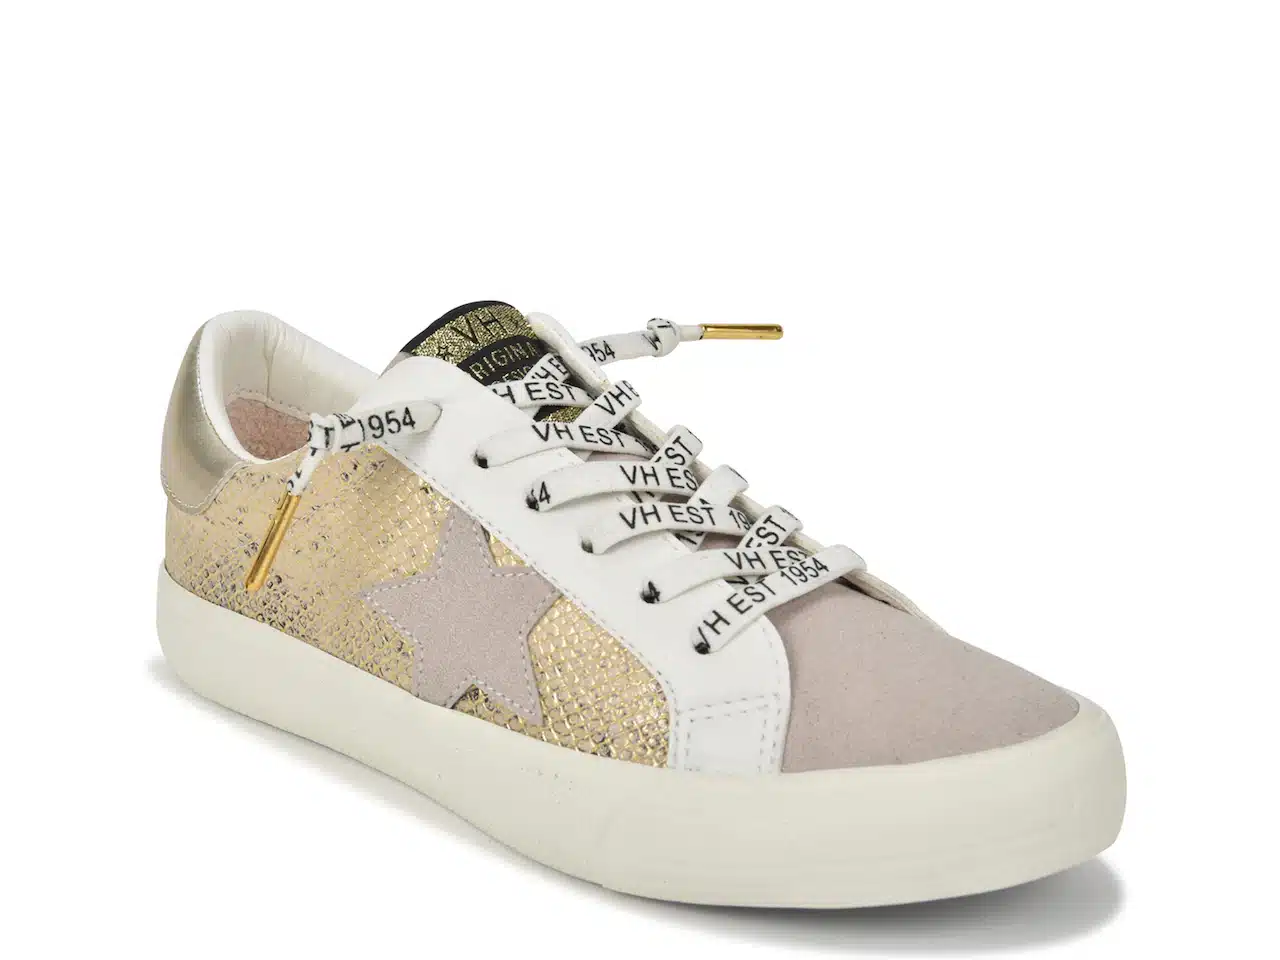 Top 10 Golden Goose Dupes, by travel blogger What the Fab